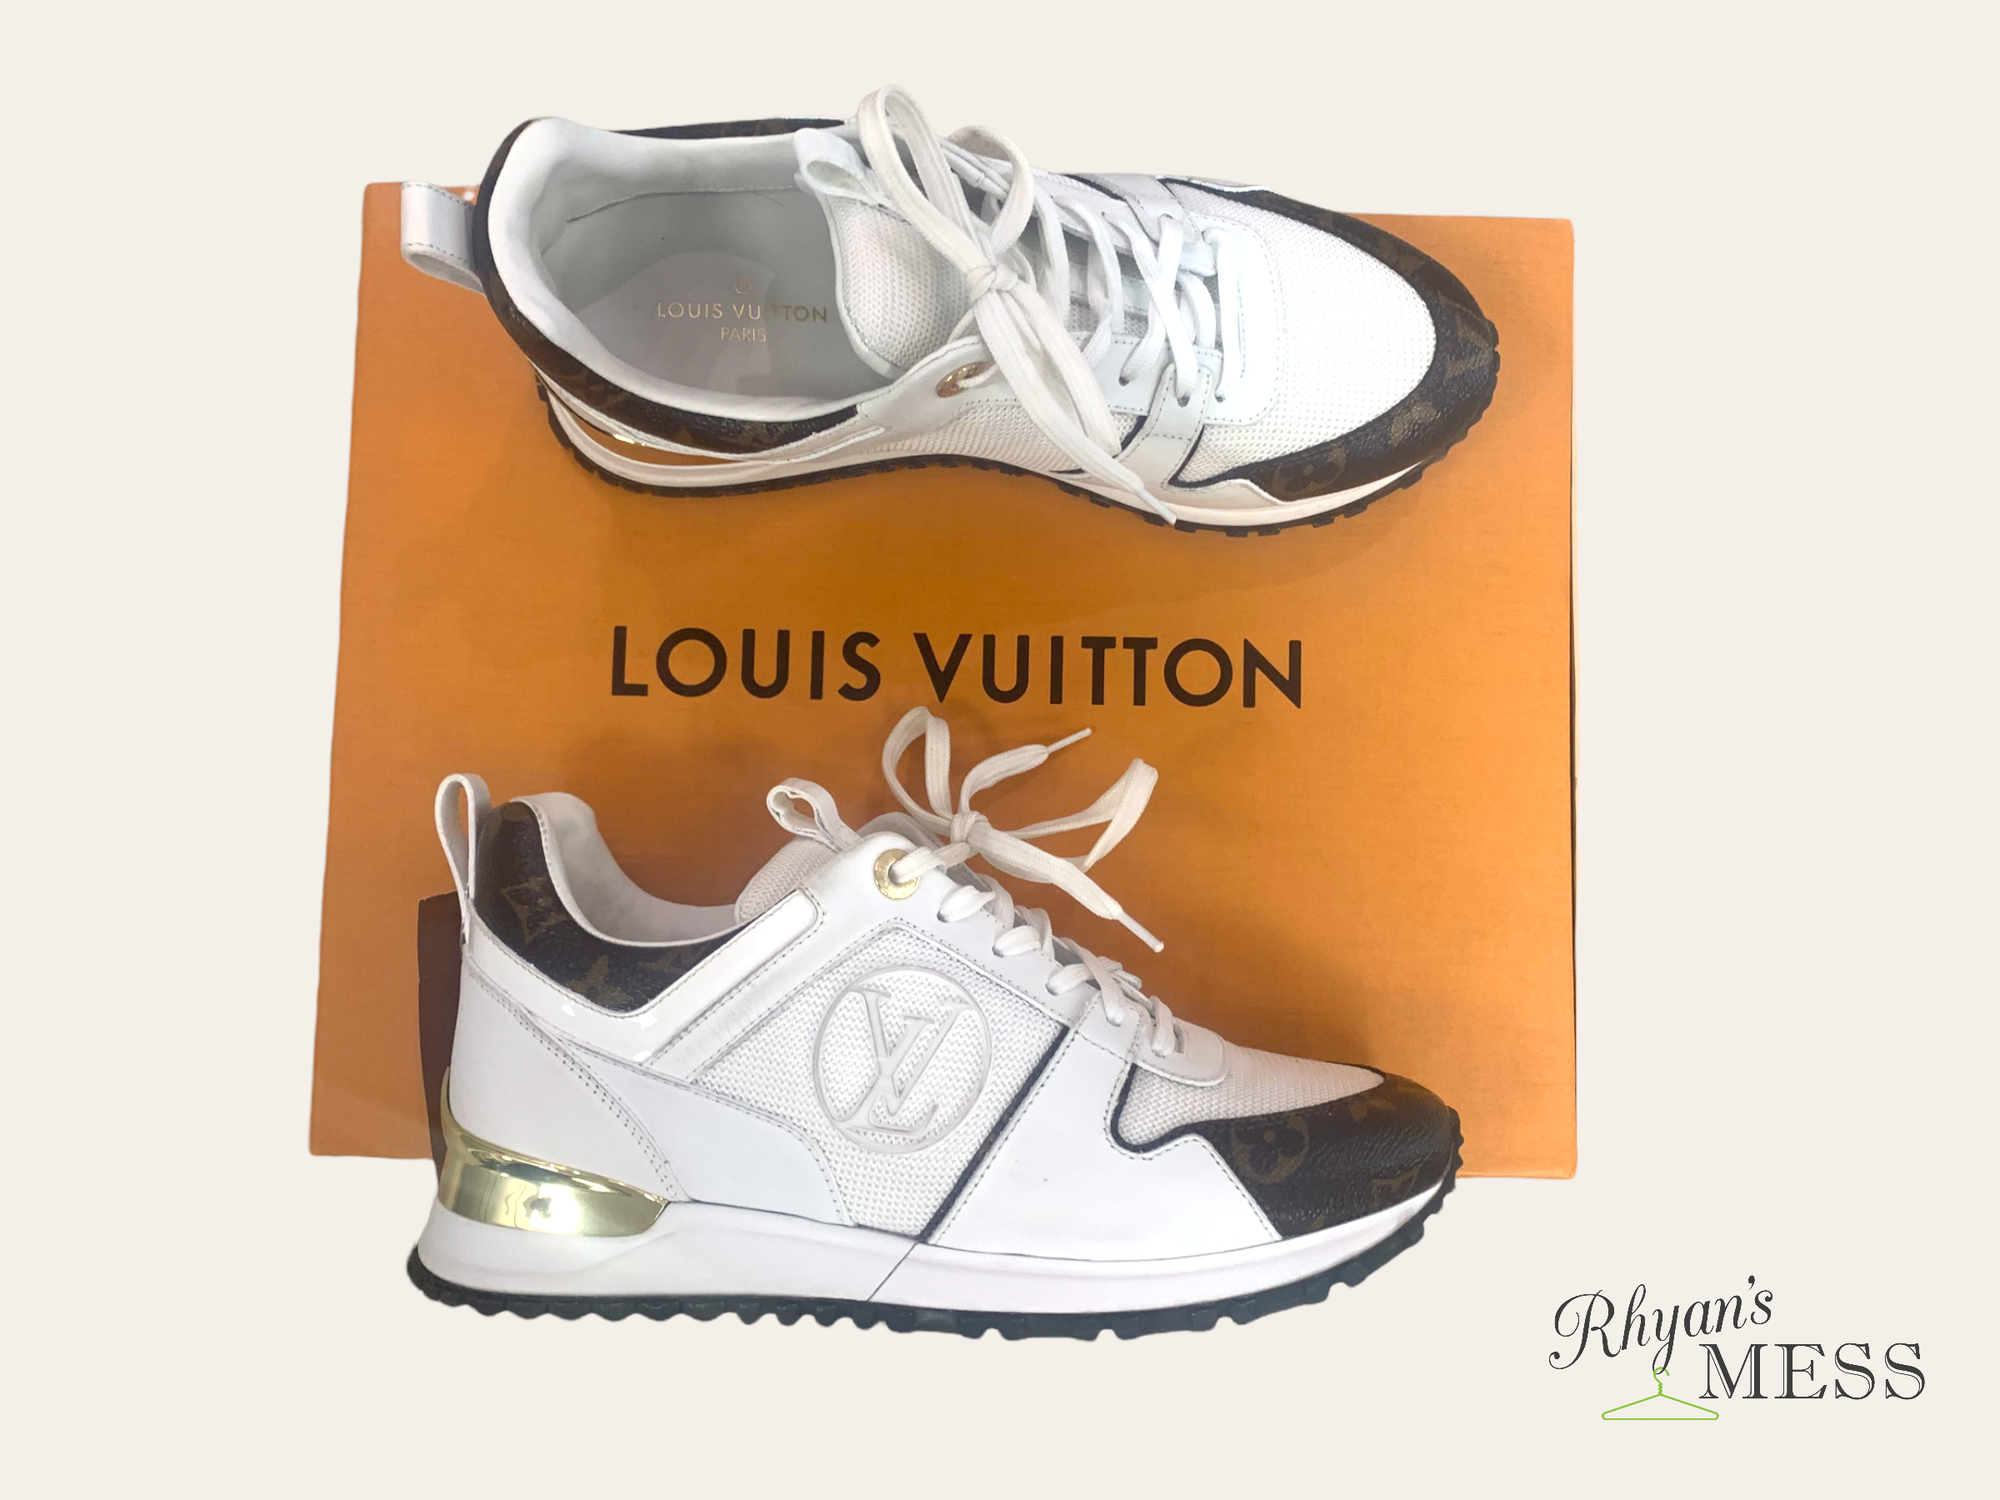 Louis Vuitton, Wht/brn, Size: 7
Worn once.
WIth box and credentials